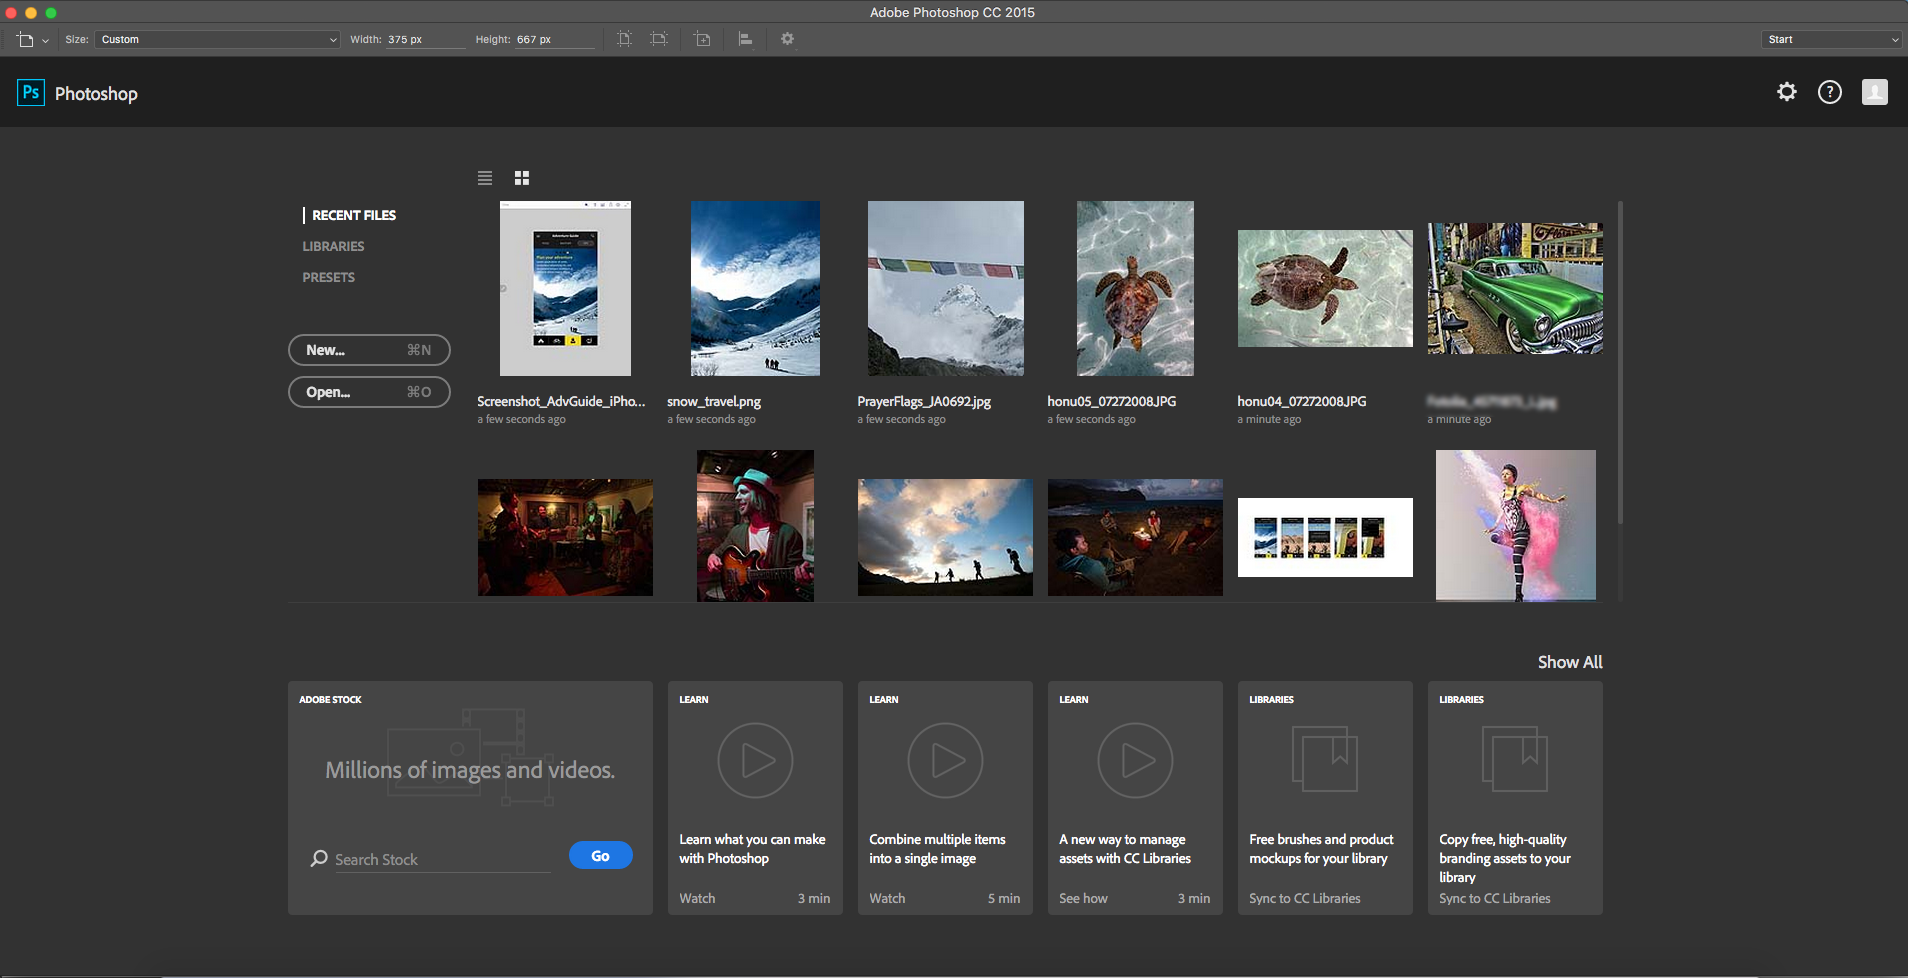 Download Adobe Photoshop CC 2018 Full Cracked For